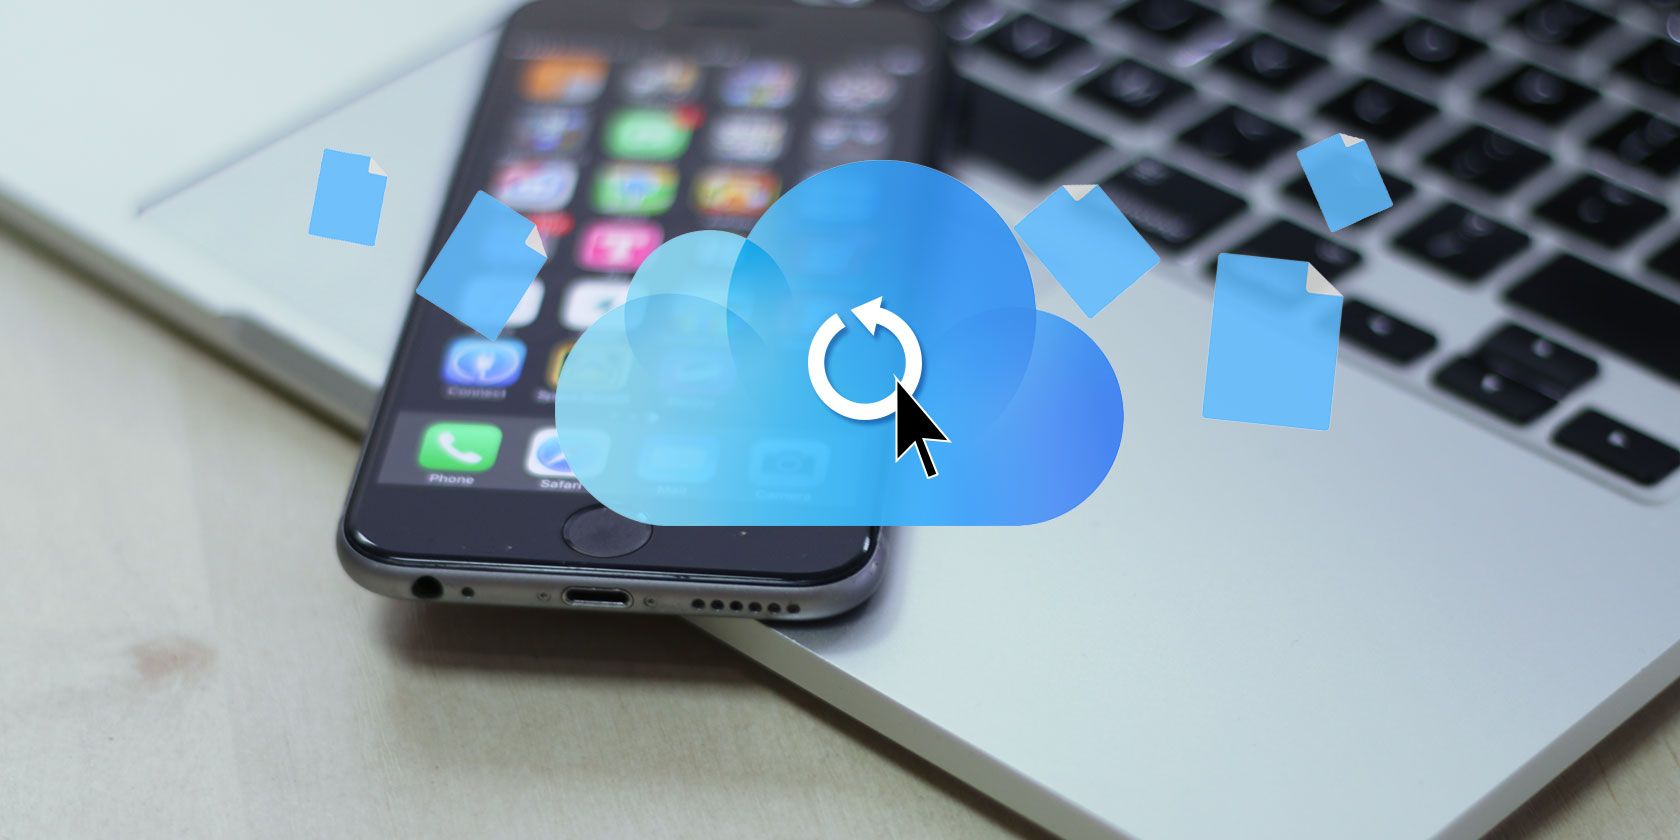 icloud symbol with iphone and macbook in background